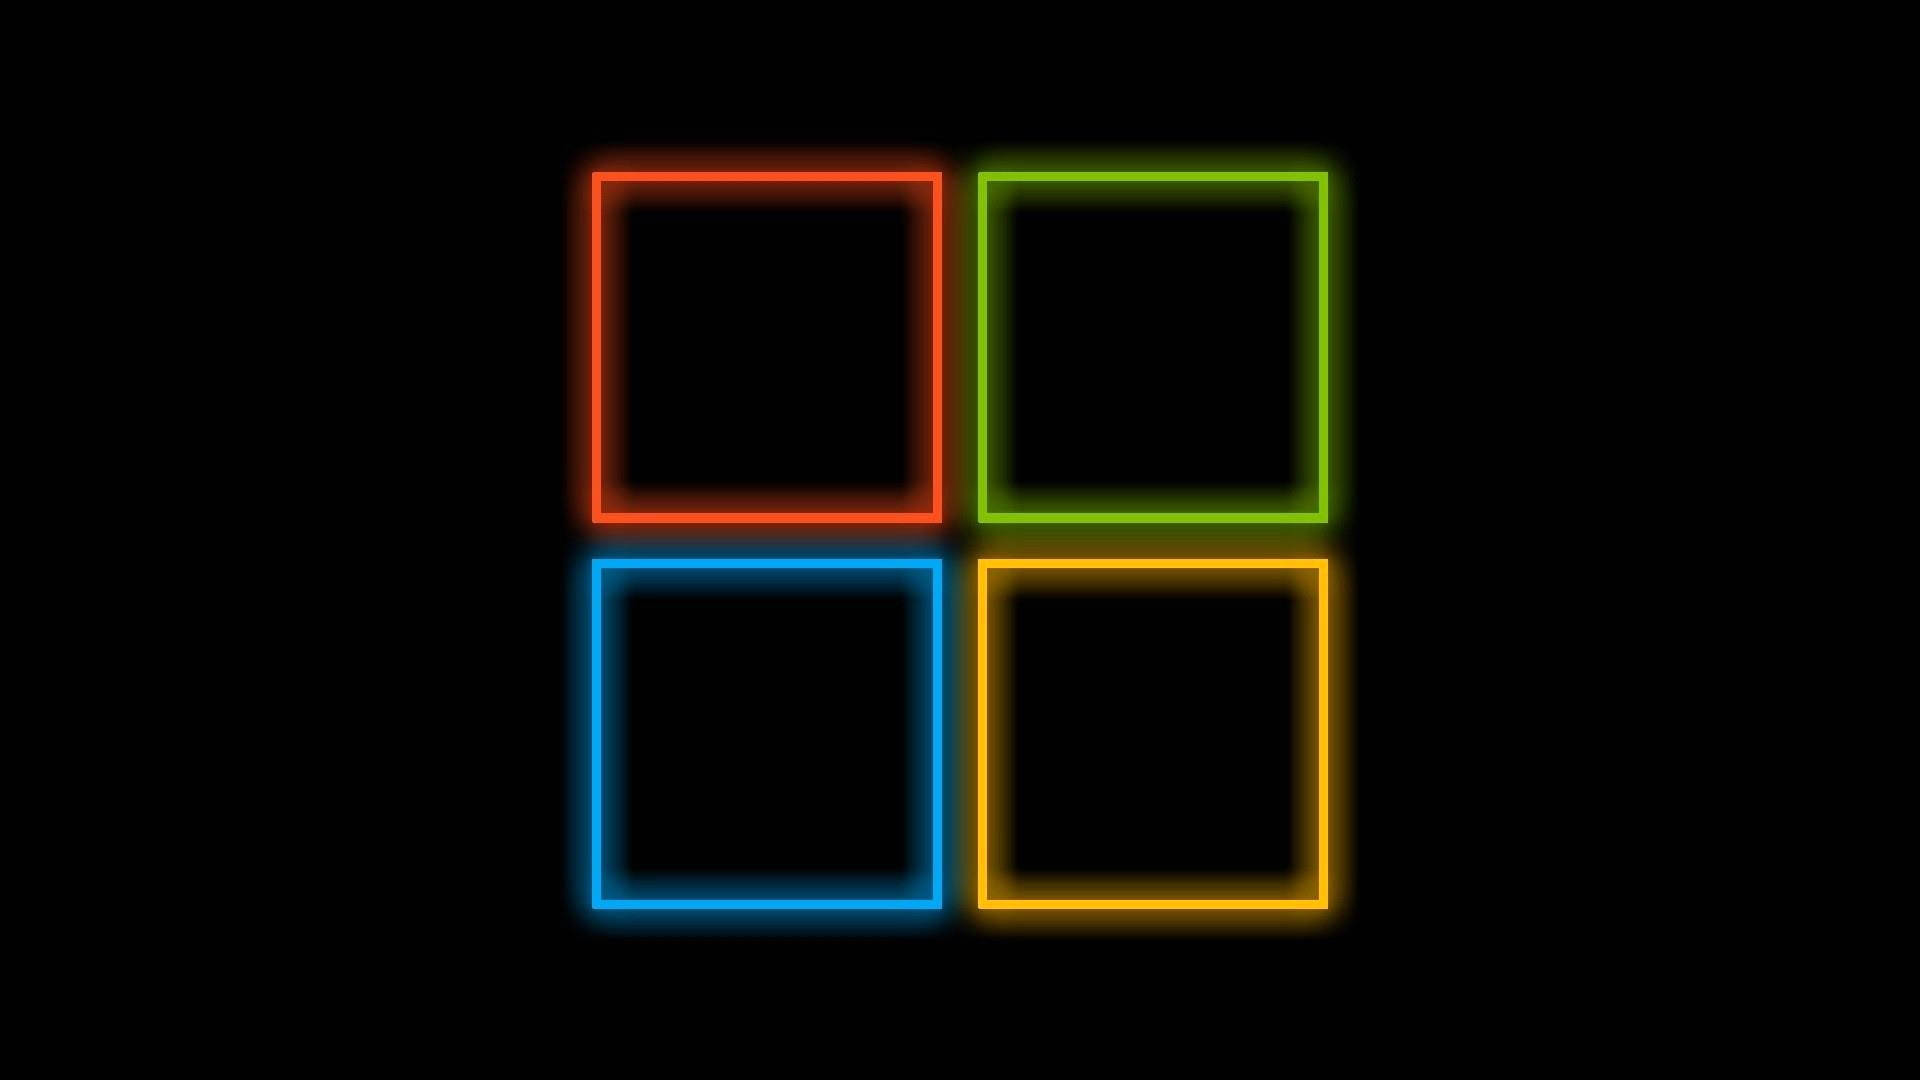 Black Windows 10 Hd Colorful Outline Background